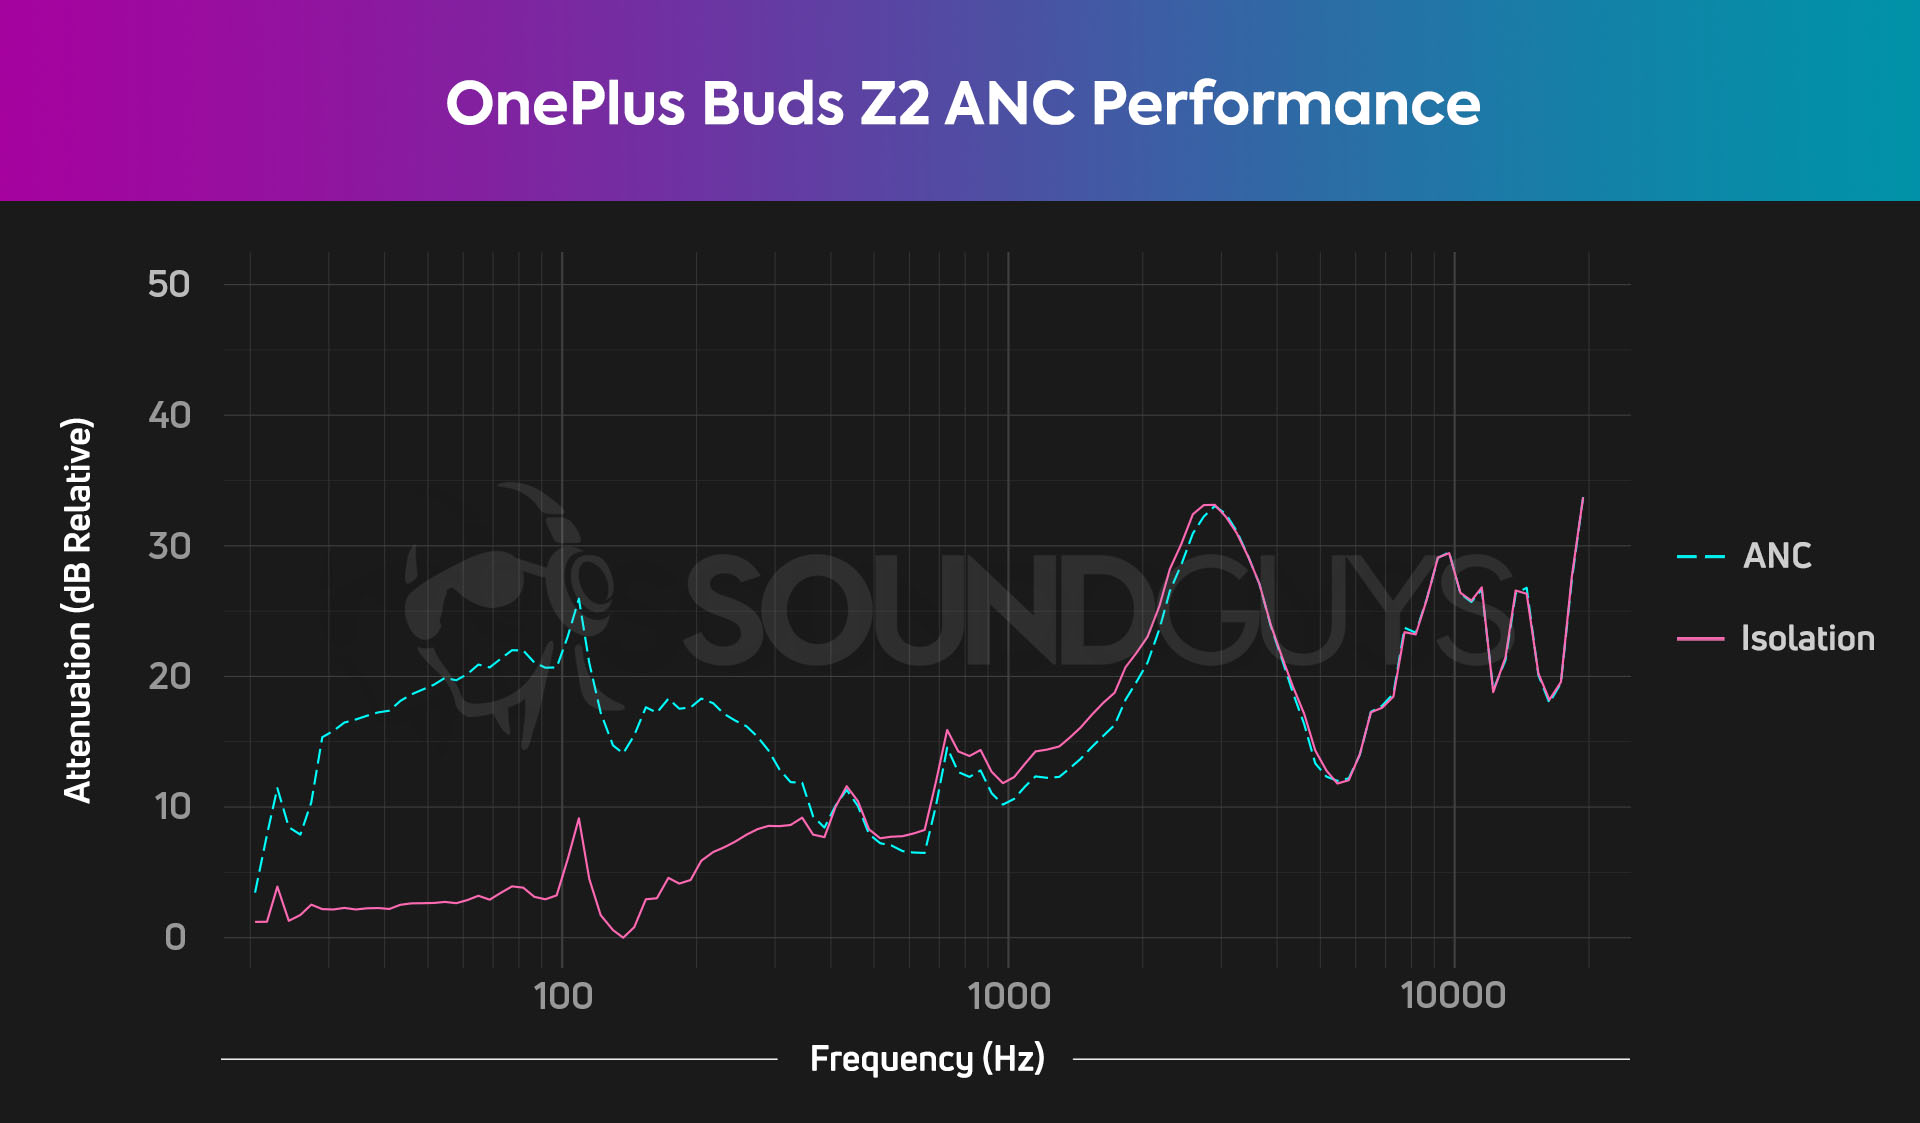 OnePlus Buds Z2 noise cancelling chart with isolation performance.